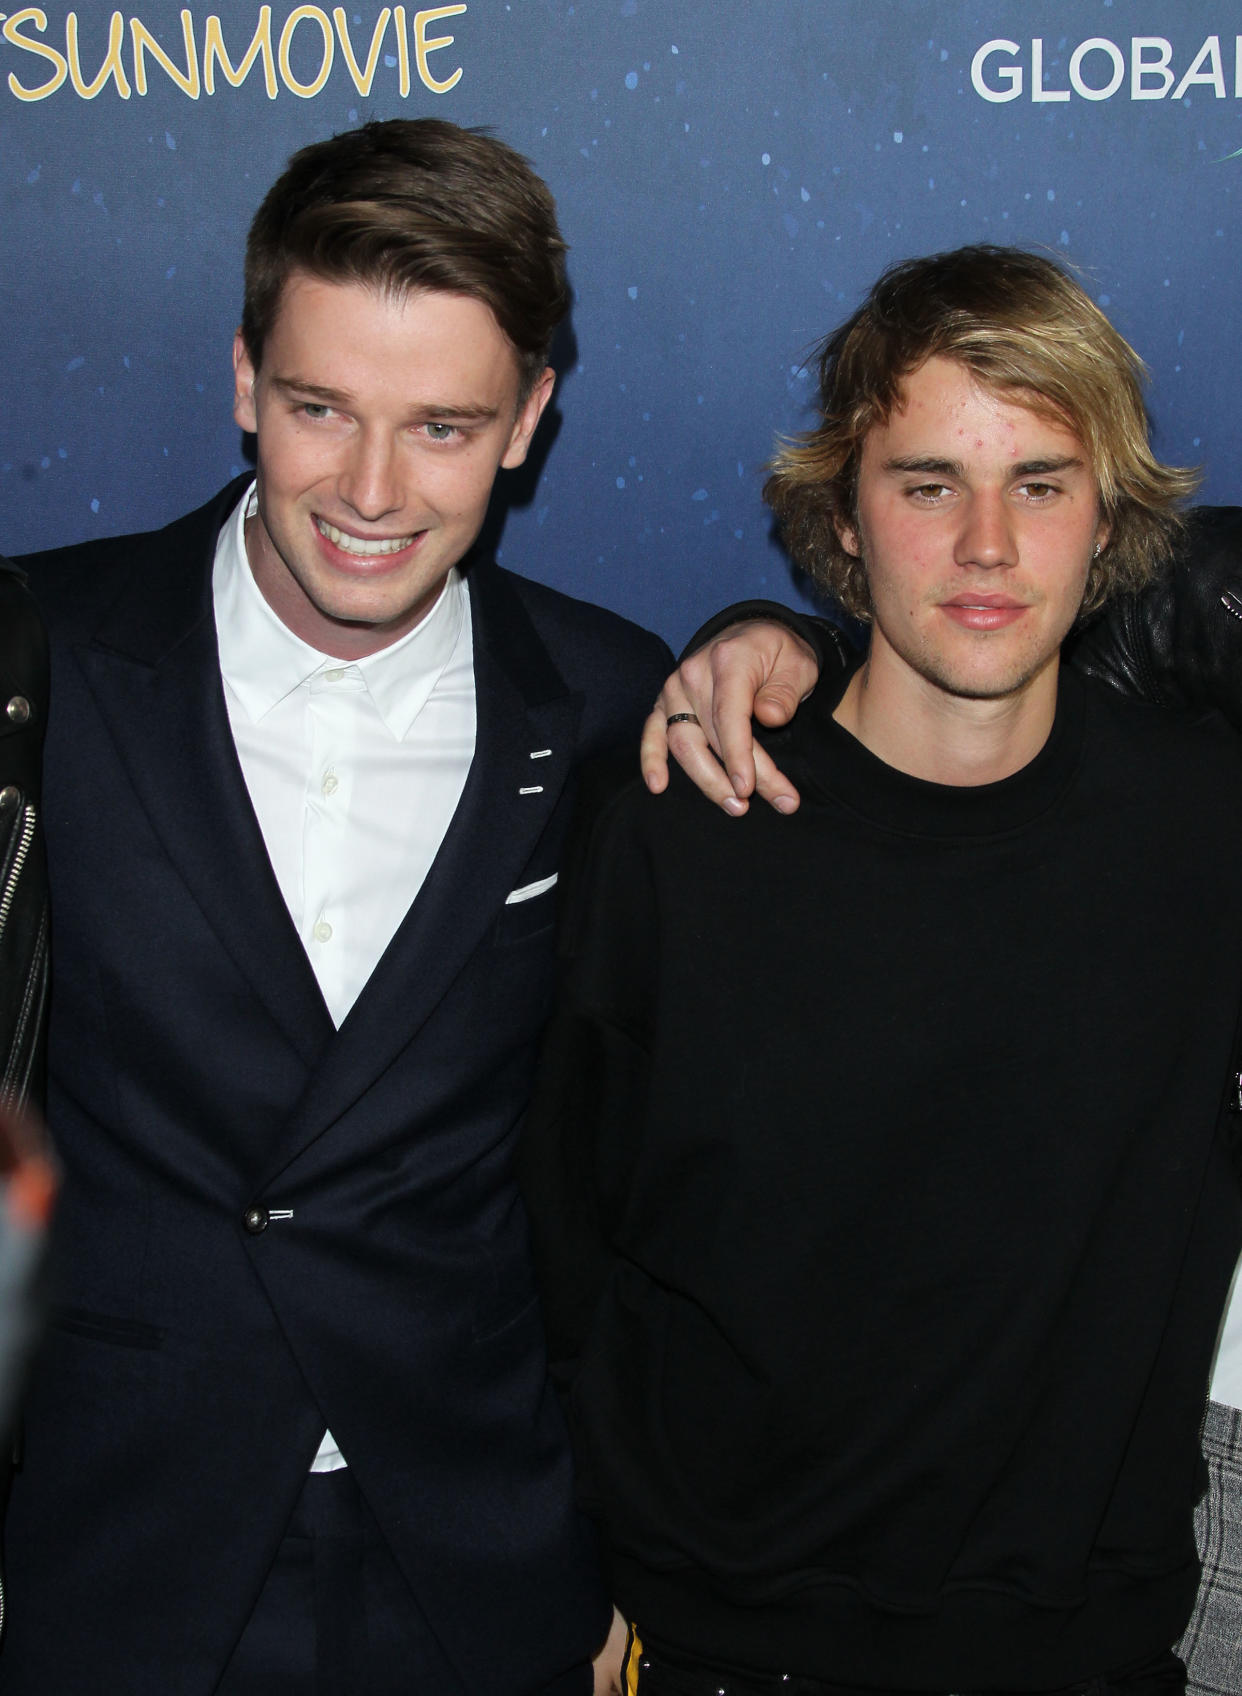 Patrick Schwarzenegger had support from pal Justin Bieber at the <em>Midnight Sun</em> premiere on March 15, 2018, in L.A. (Photo: Splash News)